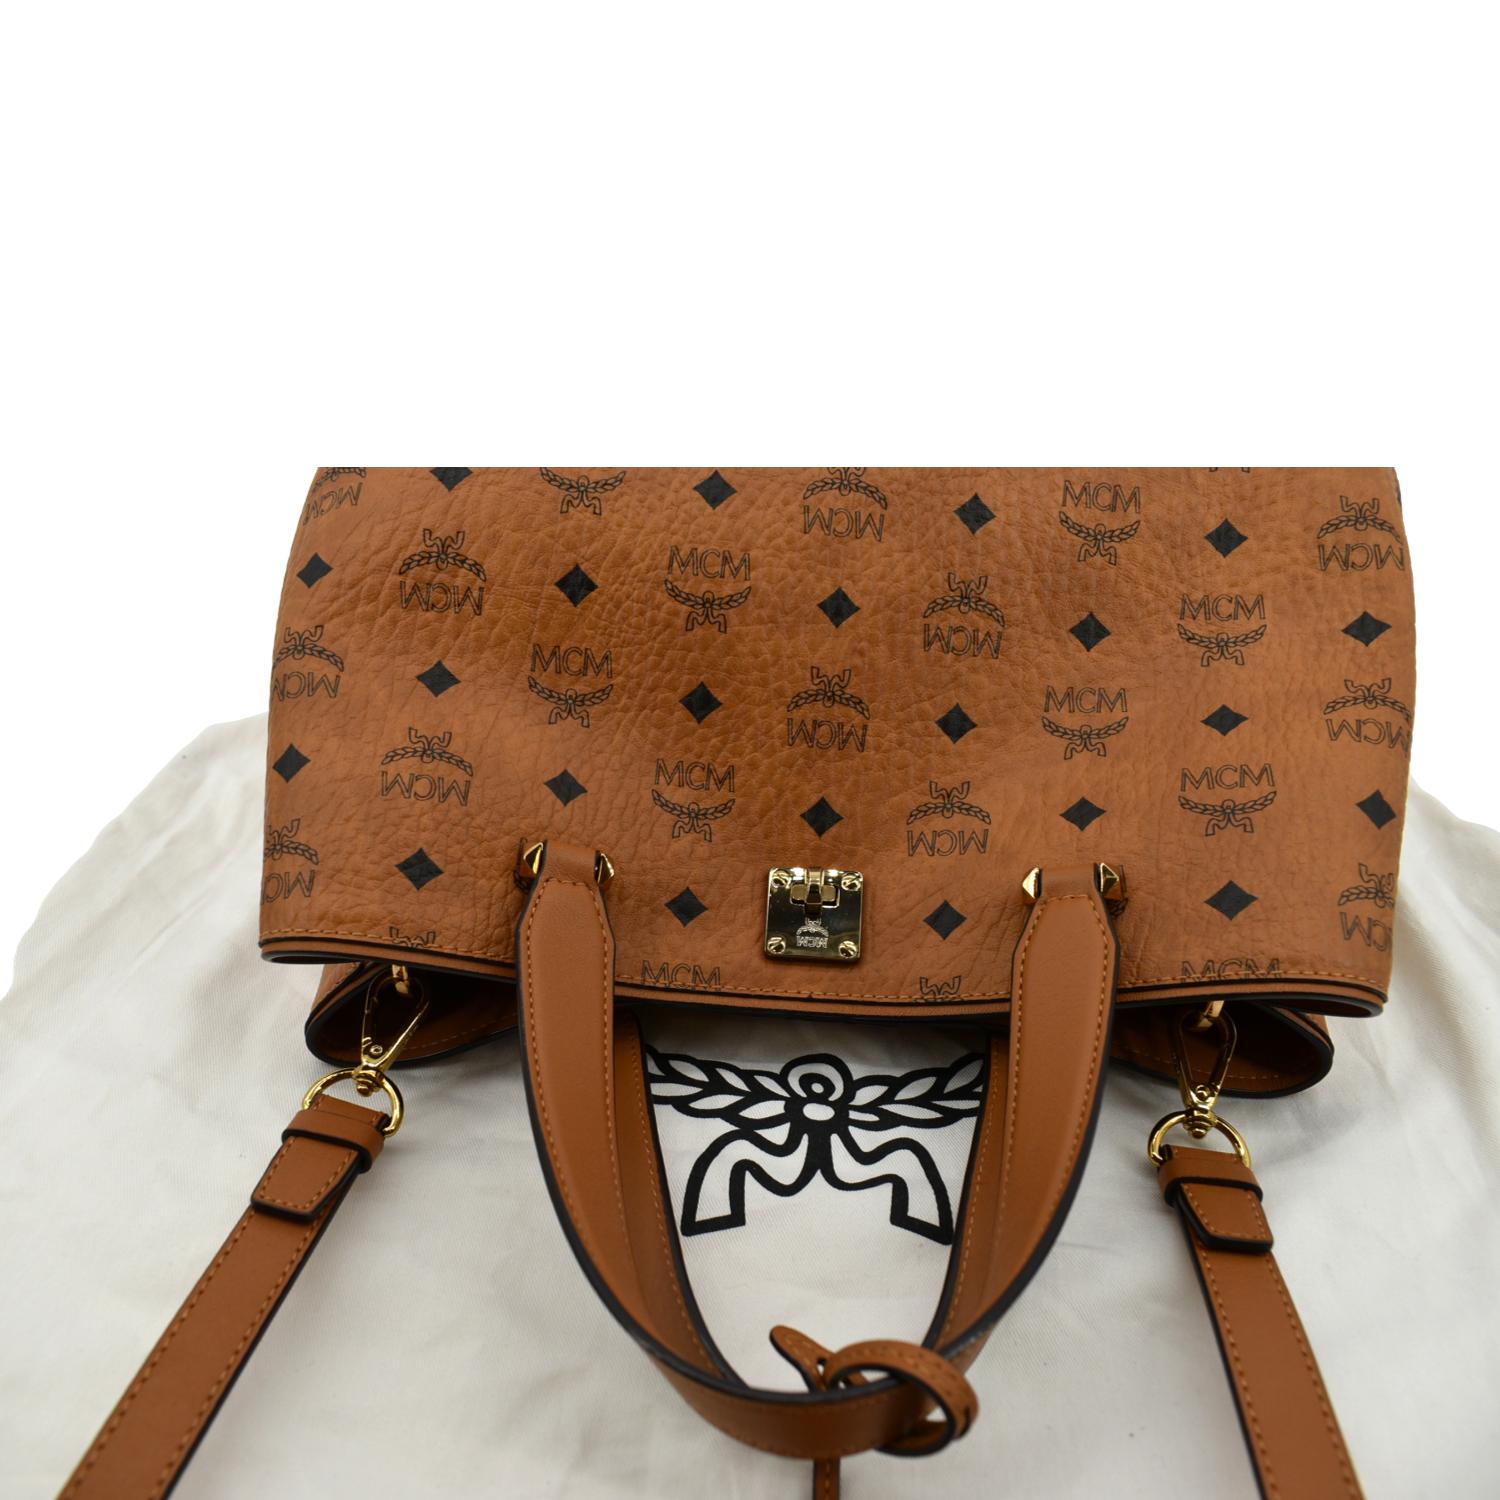 Mcm Large Leather Tote in Cognac